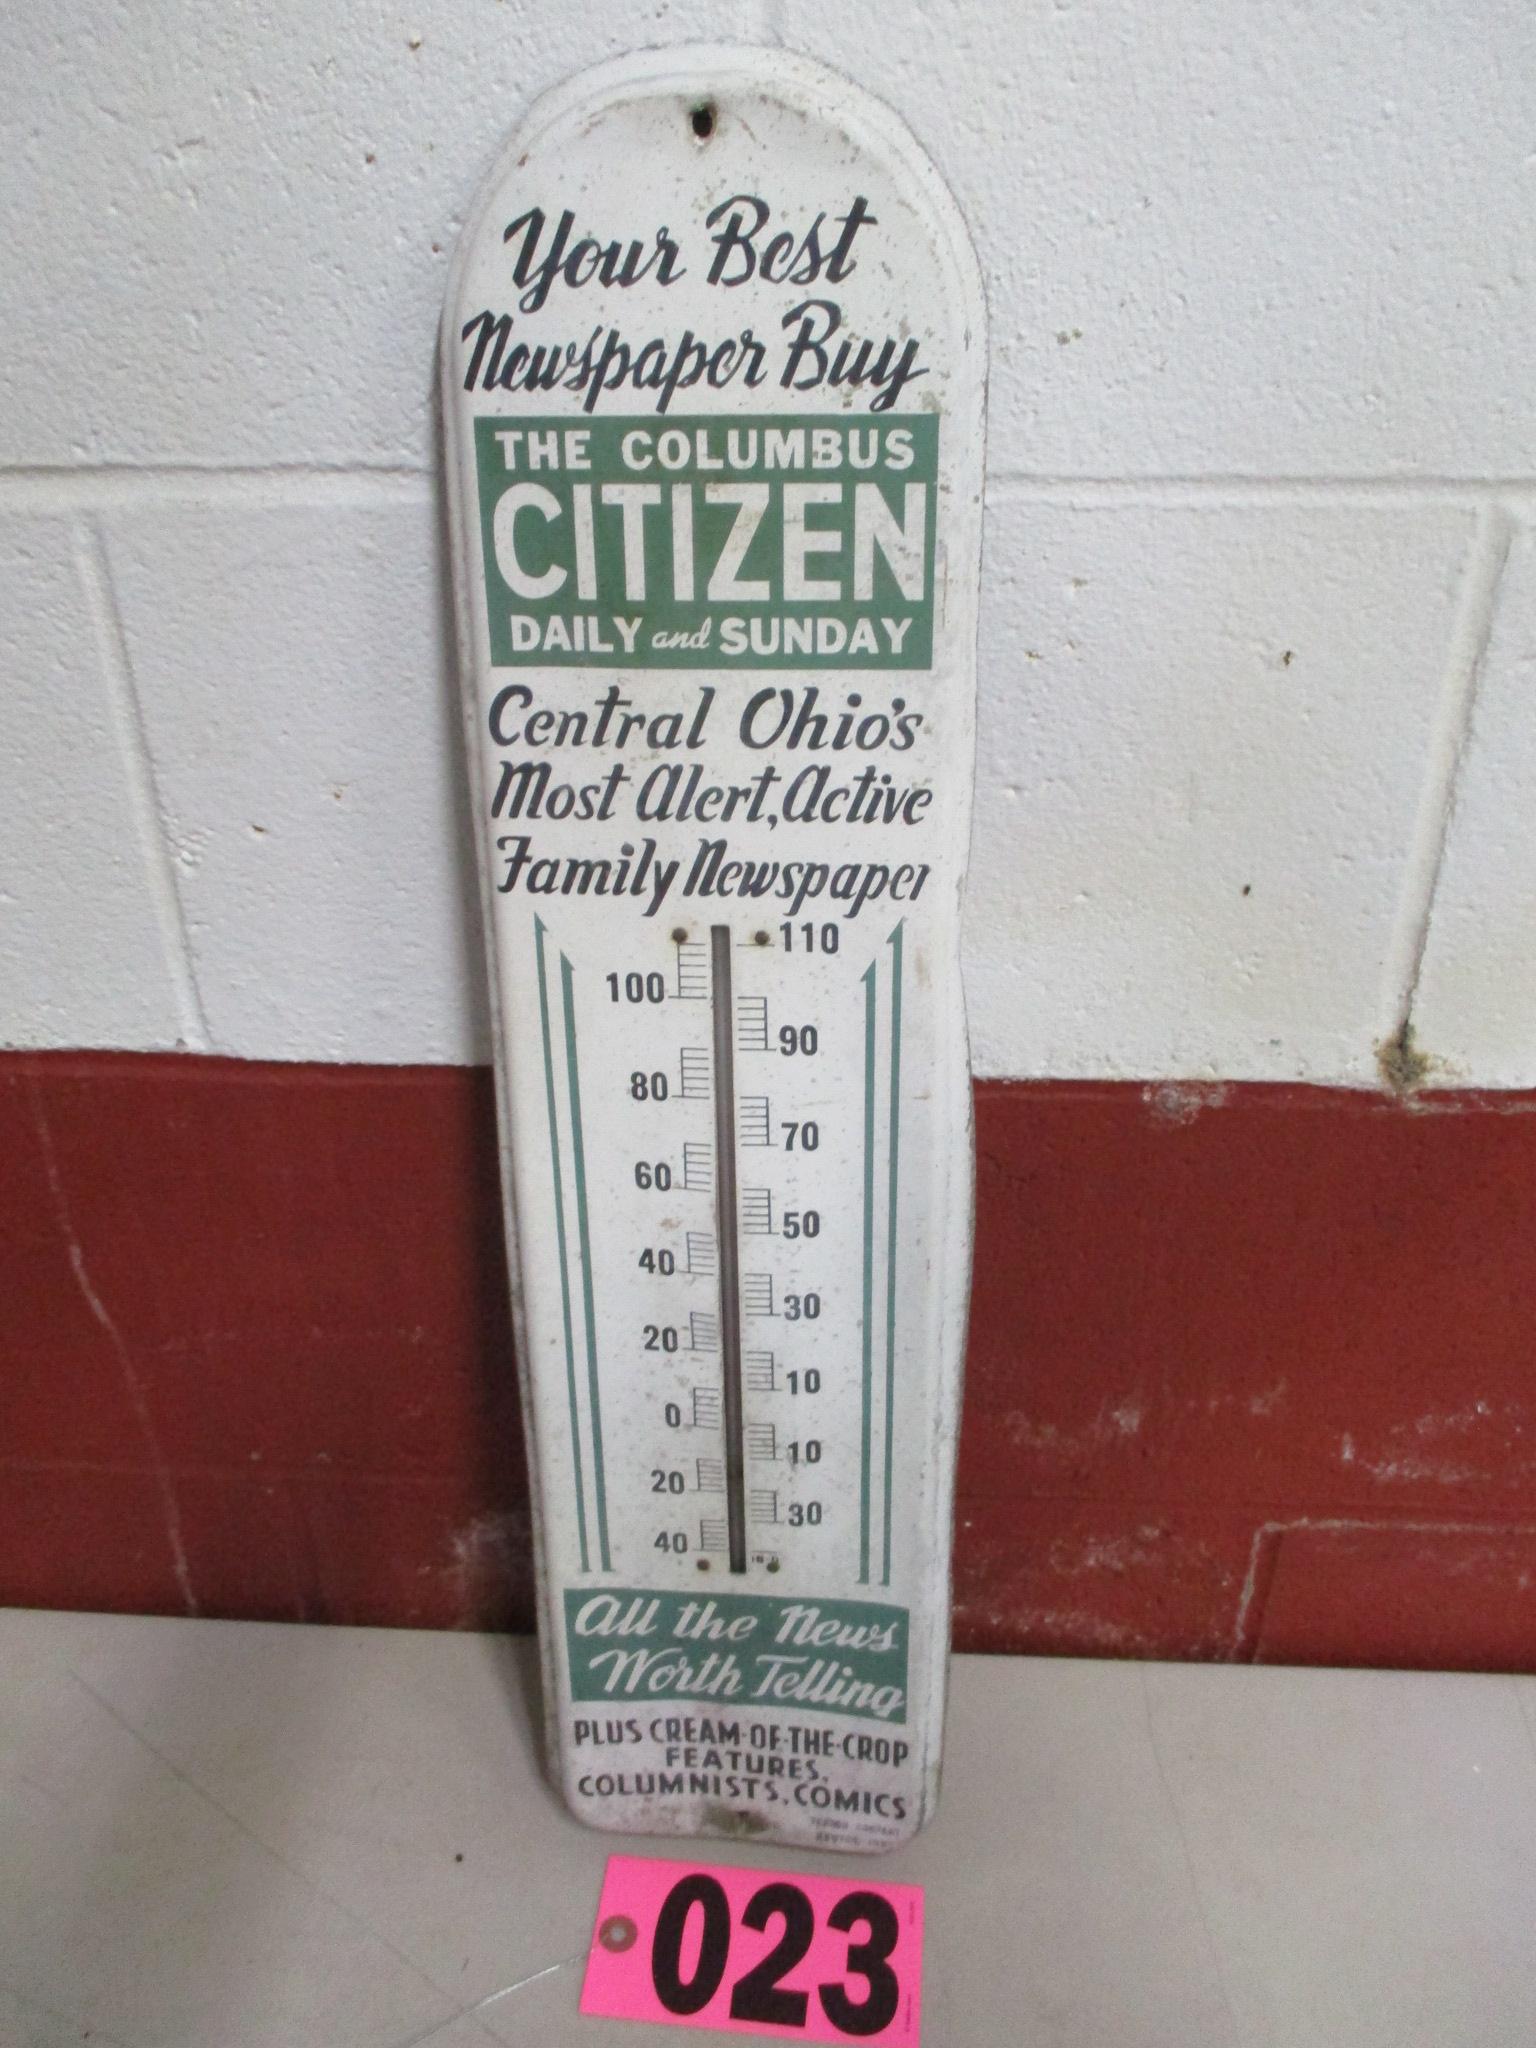 Vintage metal outdoor thermometer, Citizens Newspaper, Vernon Comapany, New